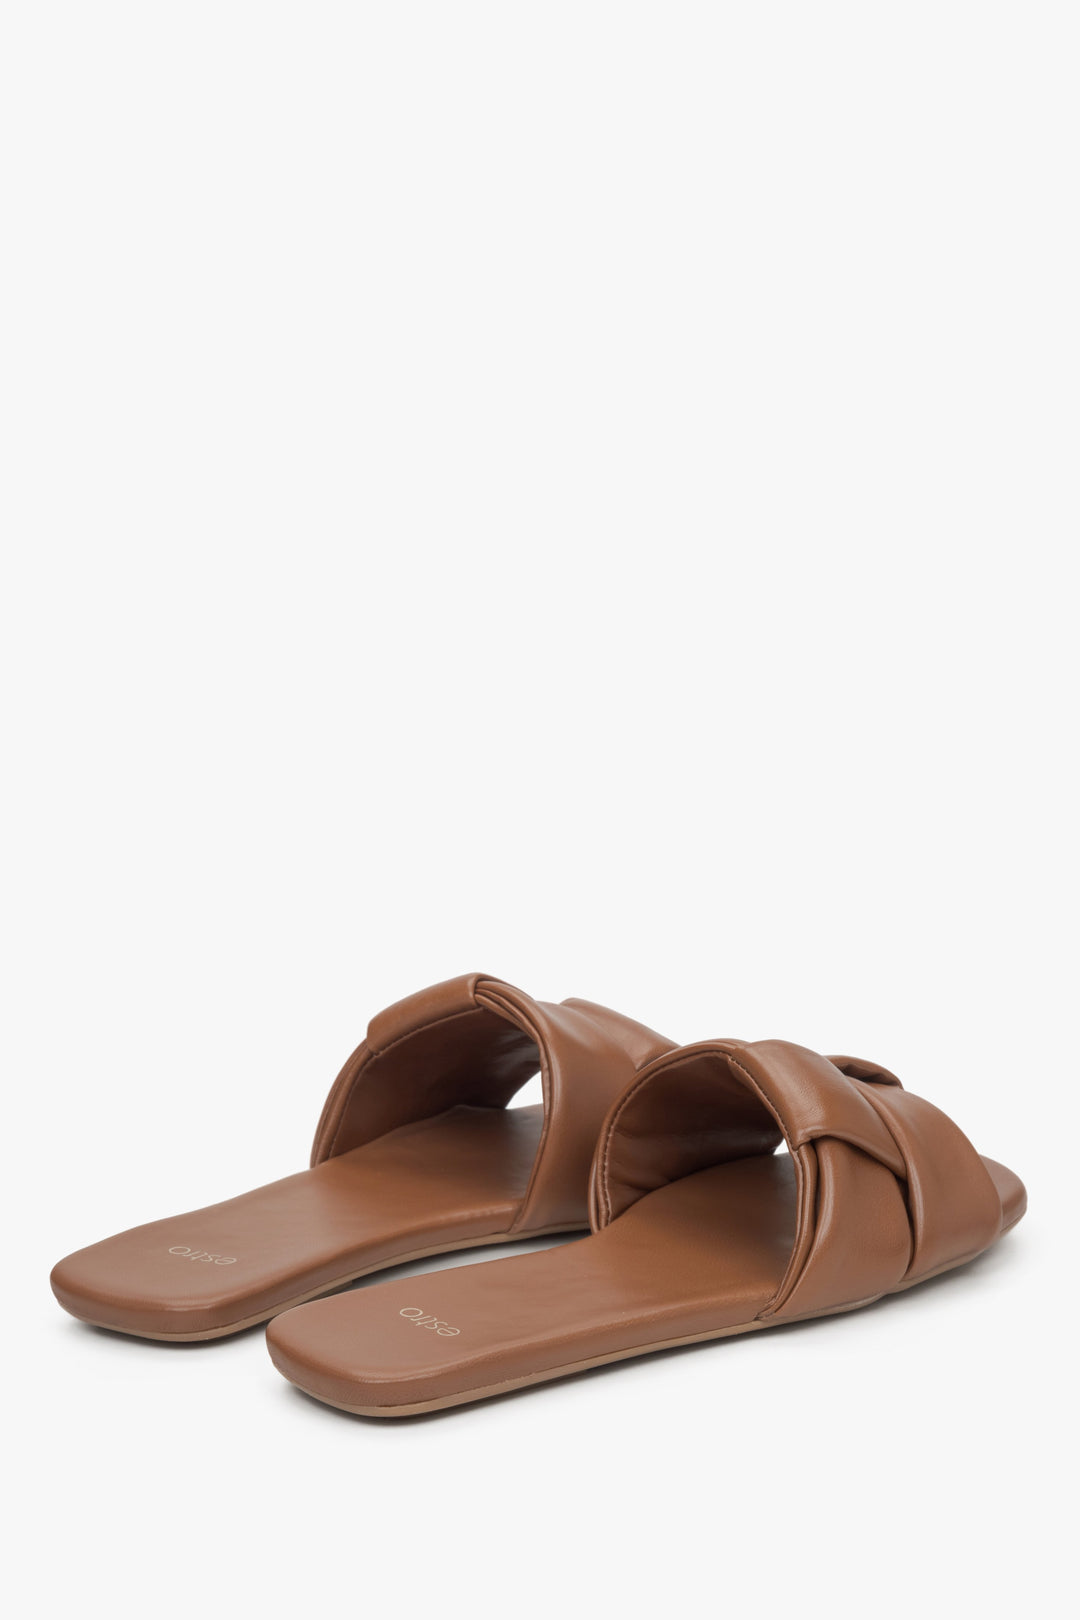 Women's Slide Sandals crafted in Brown Patch Leather